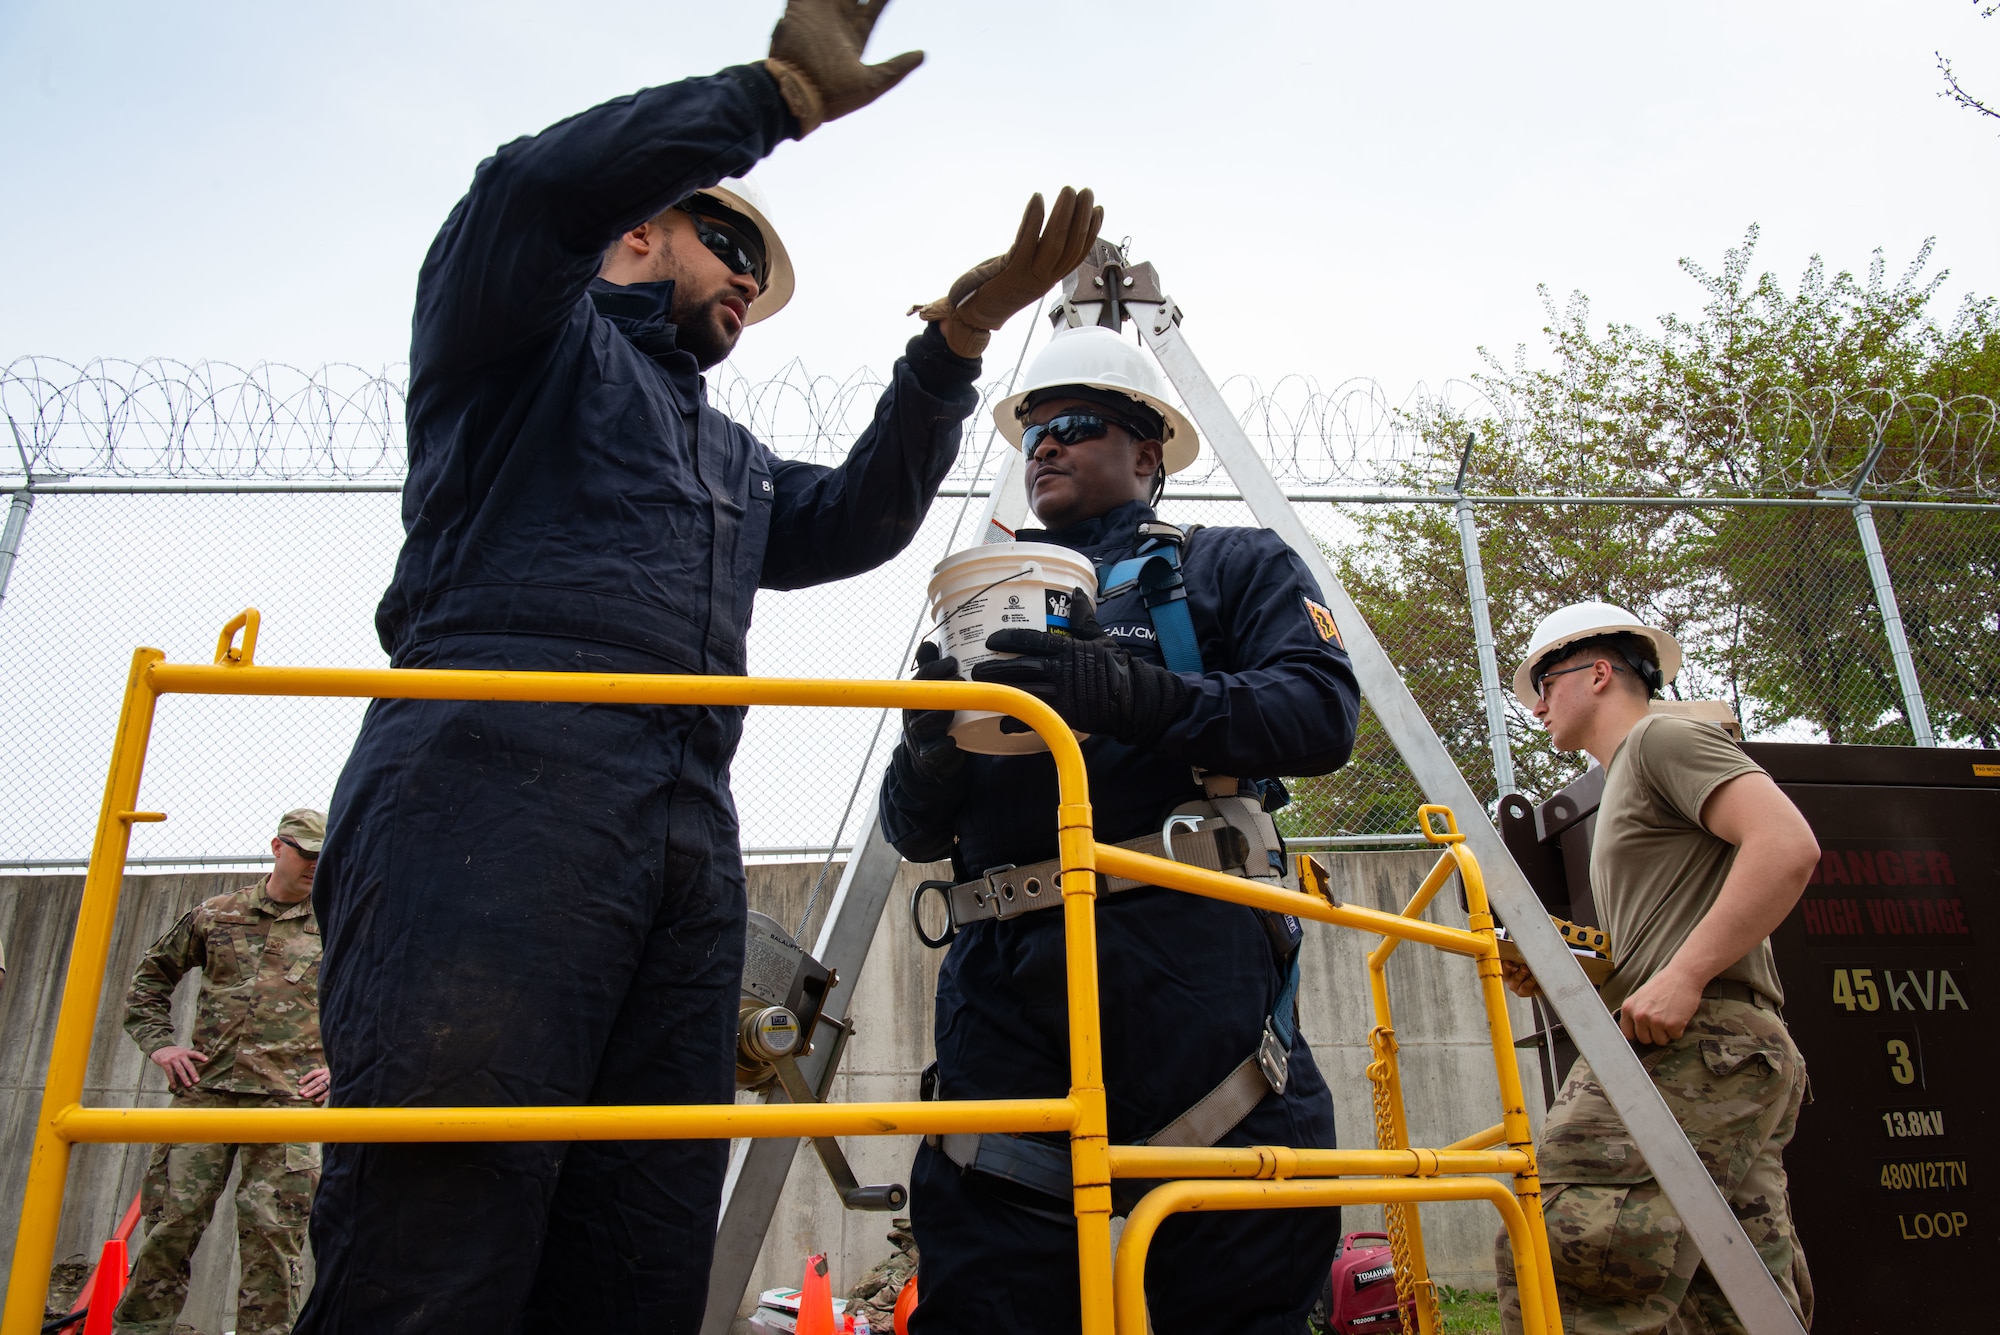 Tech. Sgt. Hilario Silverio, 51st Civil Engineer Squadron electrician, demonstrates to Senior Airman Jayrell Norfleet, 51st CES electrical systems journeyman, how to pull a cable into a confined space to provide a lighting source at Osan Air Base, Republic of Korea, April 21, 2022.